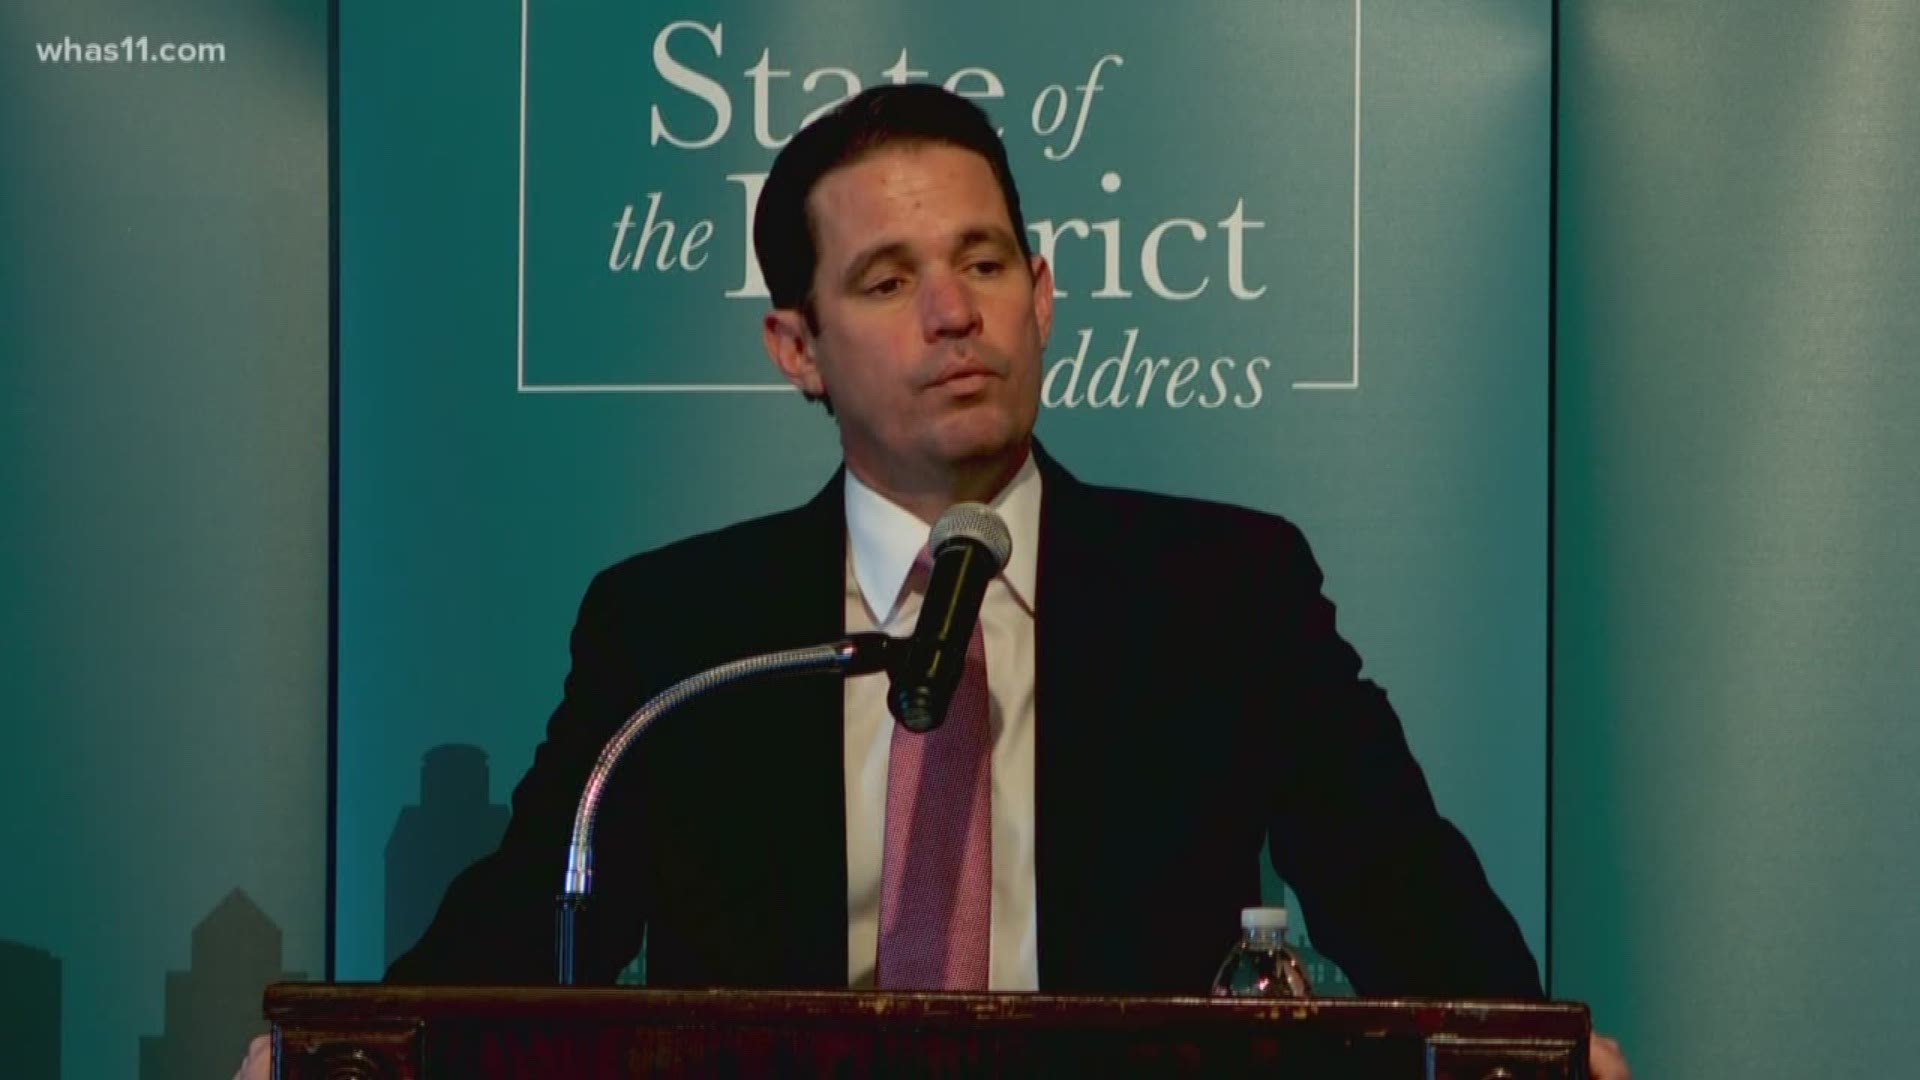 Dr. Pollio said when he officially took over a year ago, the district was in crisis. Twelve months later, he now calls it a district in transformation.